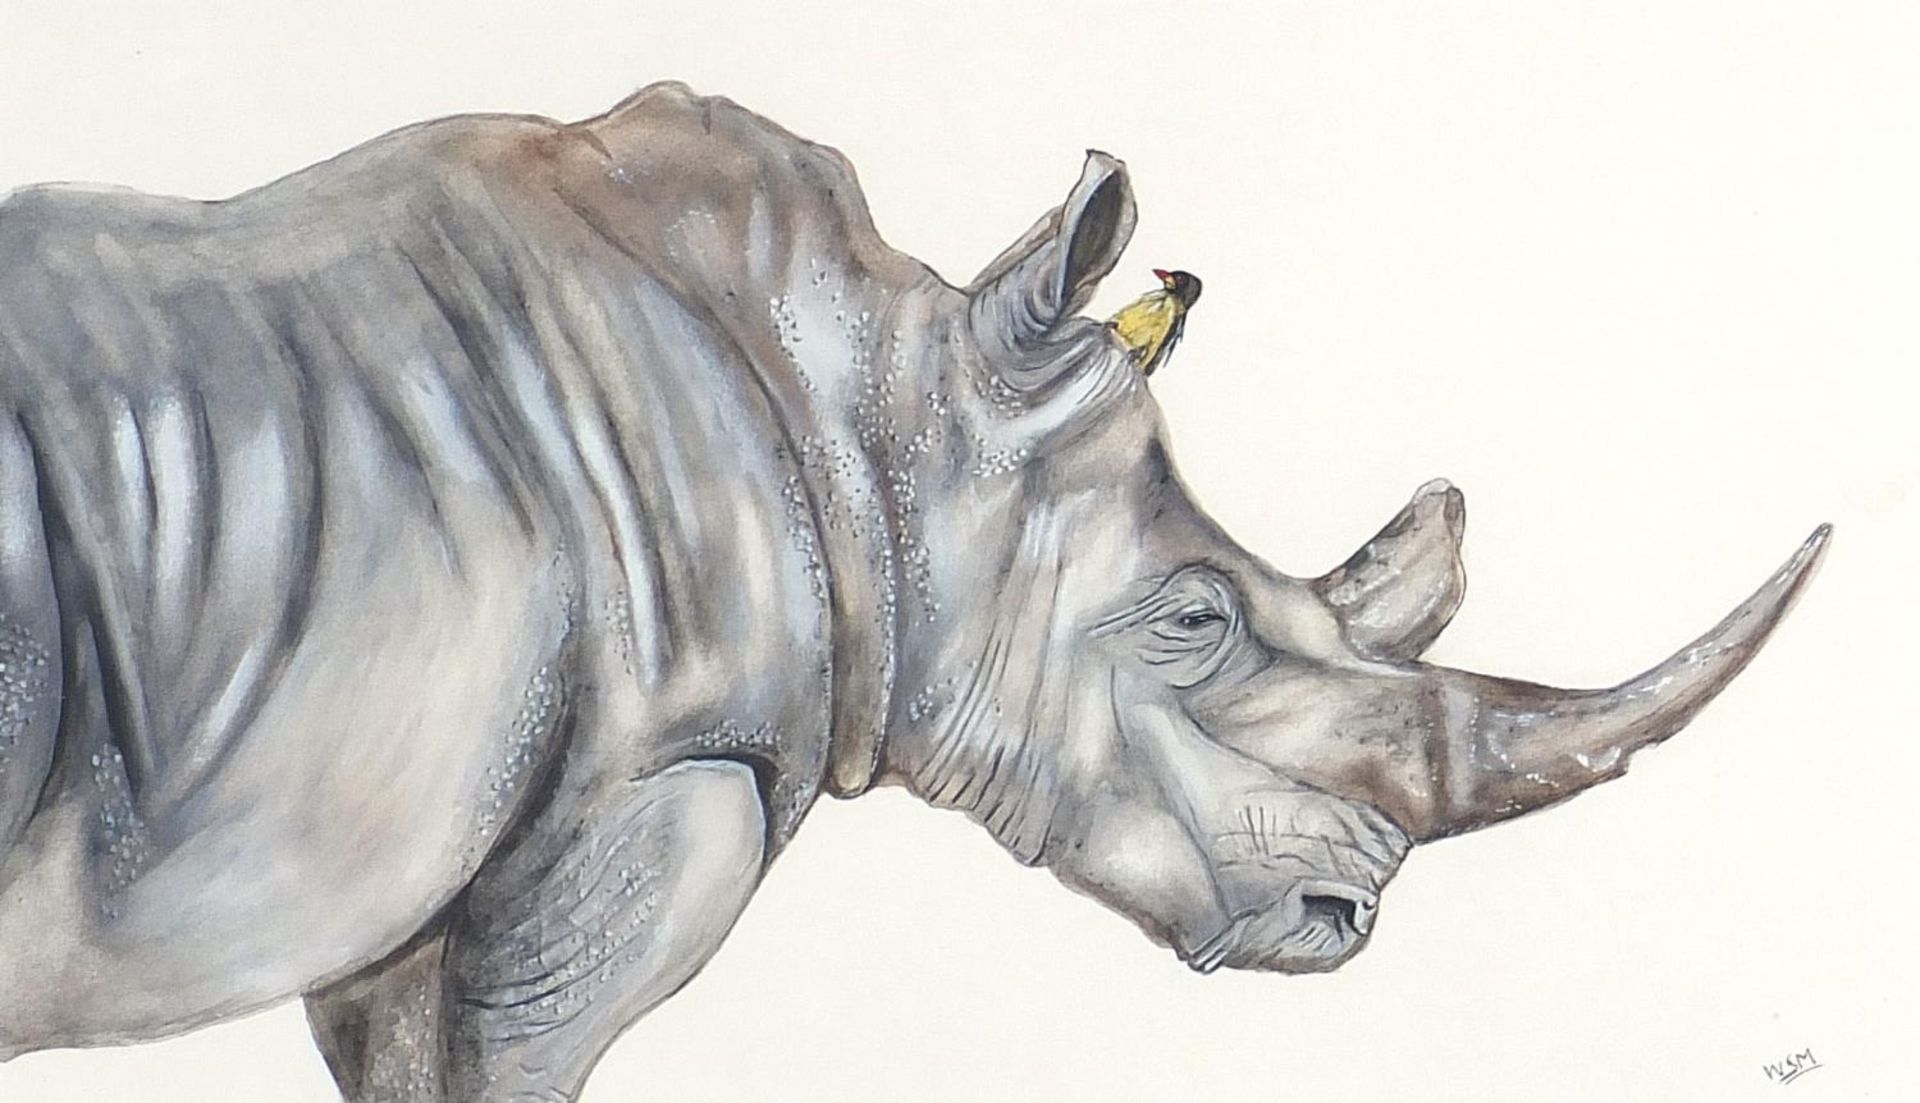 Will Smith - Rhinoceros and bird, watercolour, monogrammed, mounted, framed and glazed, 56cm x 32.